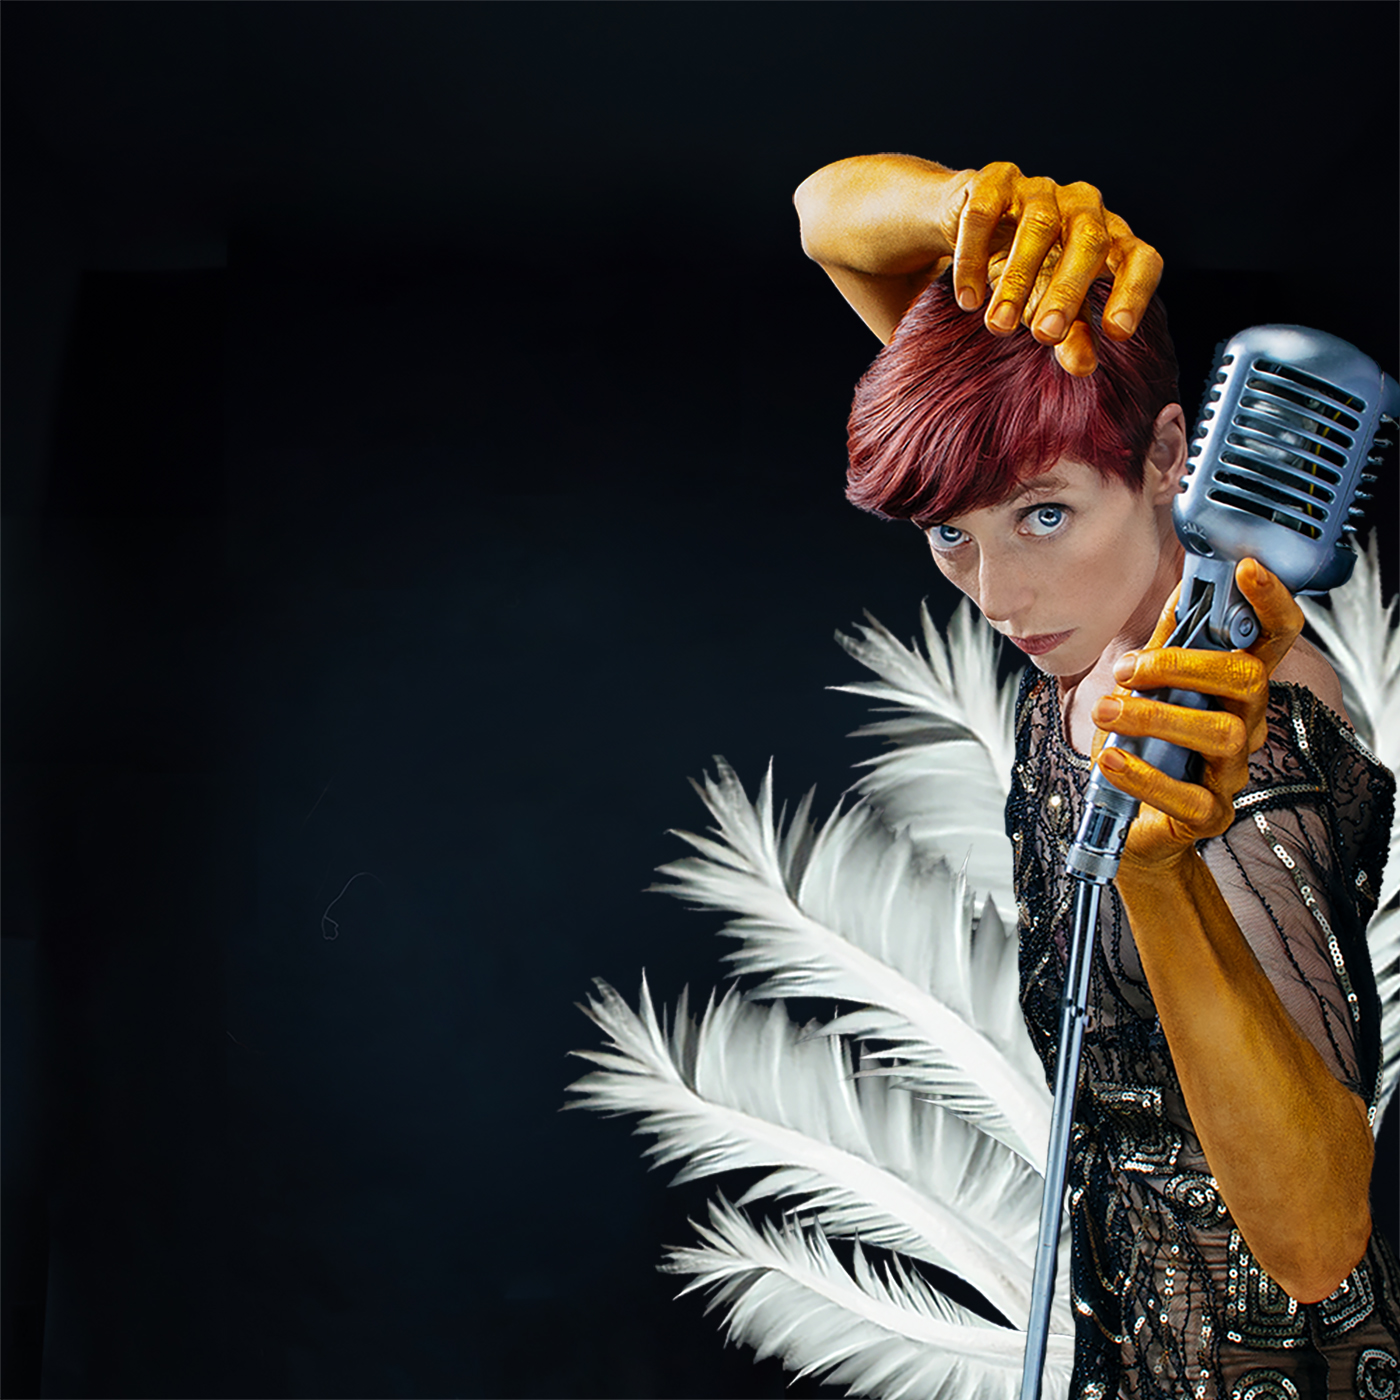 Dancer in sequins surrounded by feathers holds an old fashioned microphone